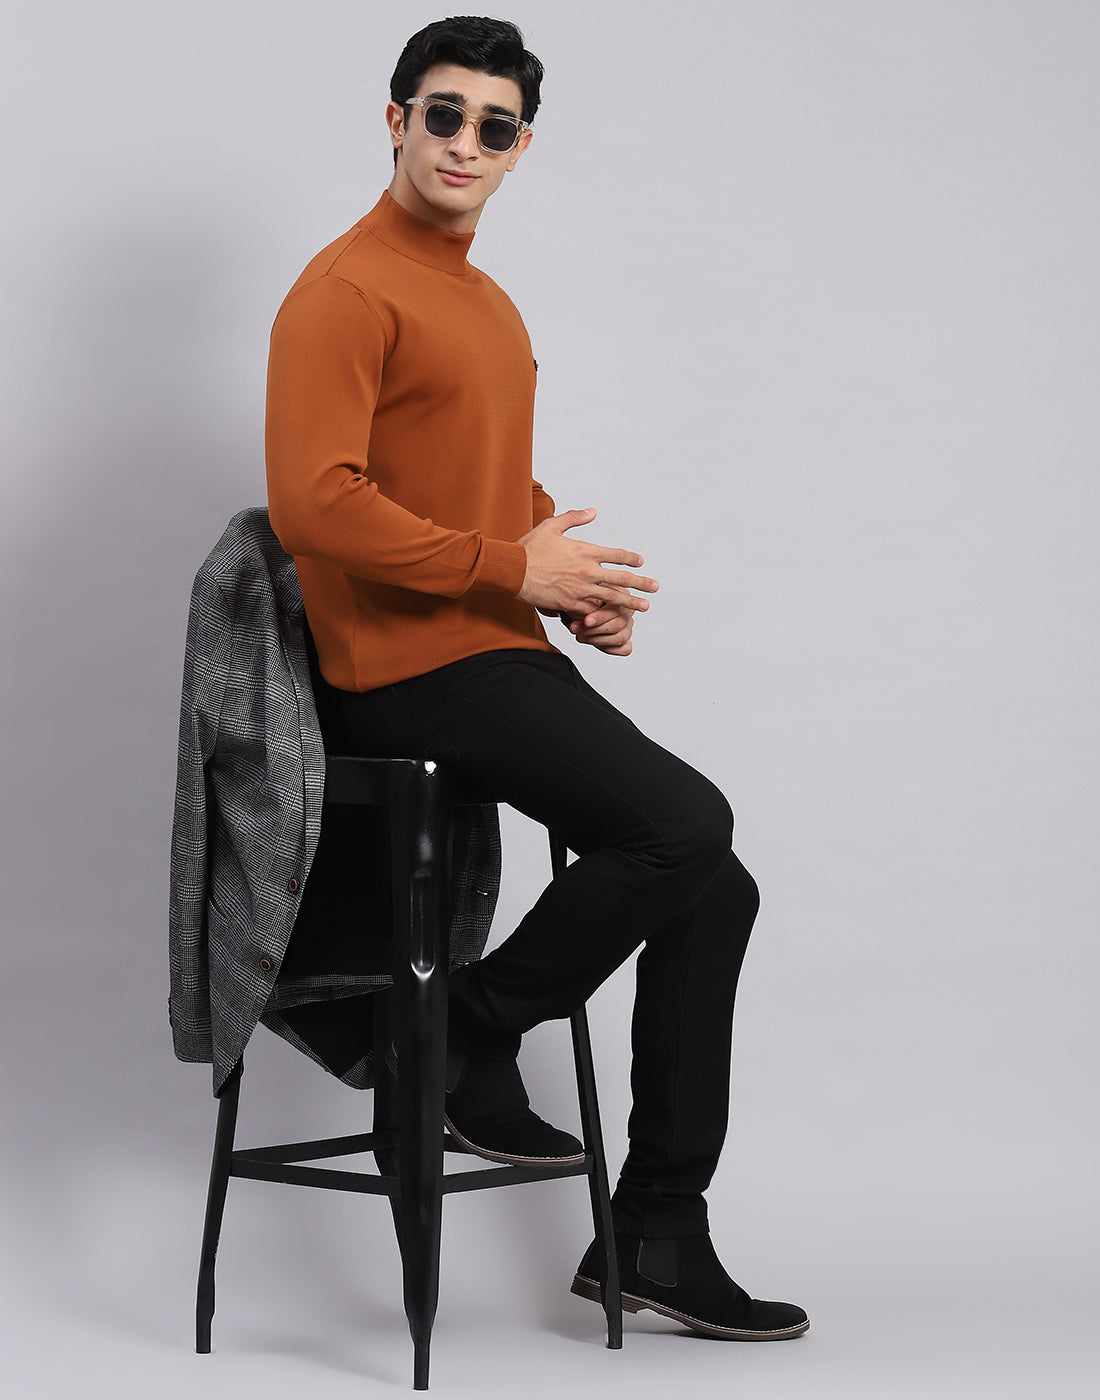 Men Rust Solid T Neck Full Sleeve Sweaters/Pullovers